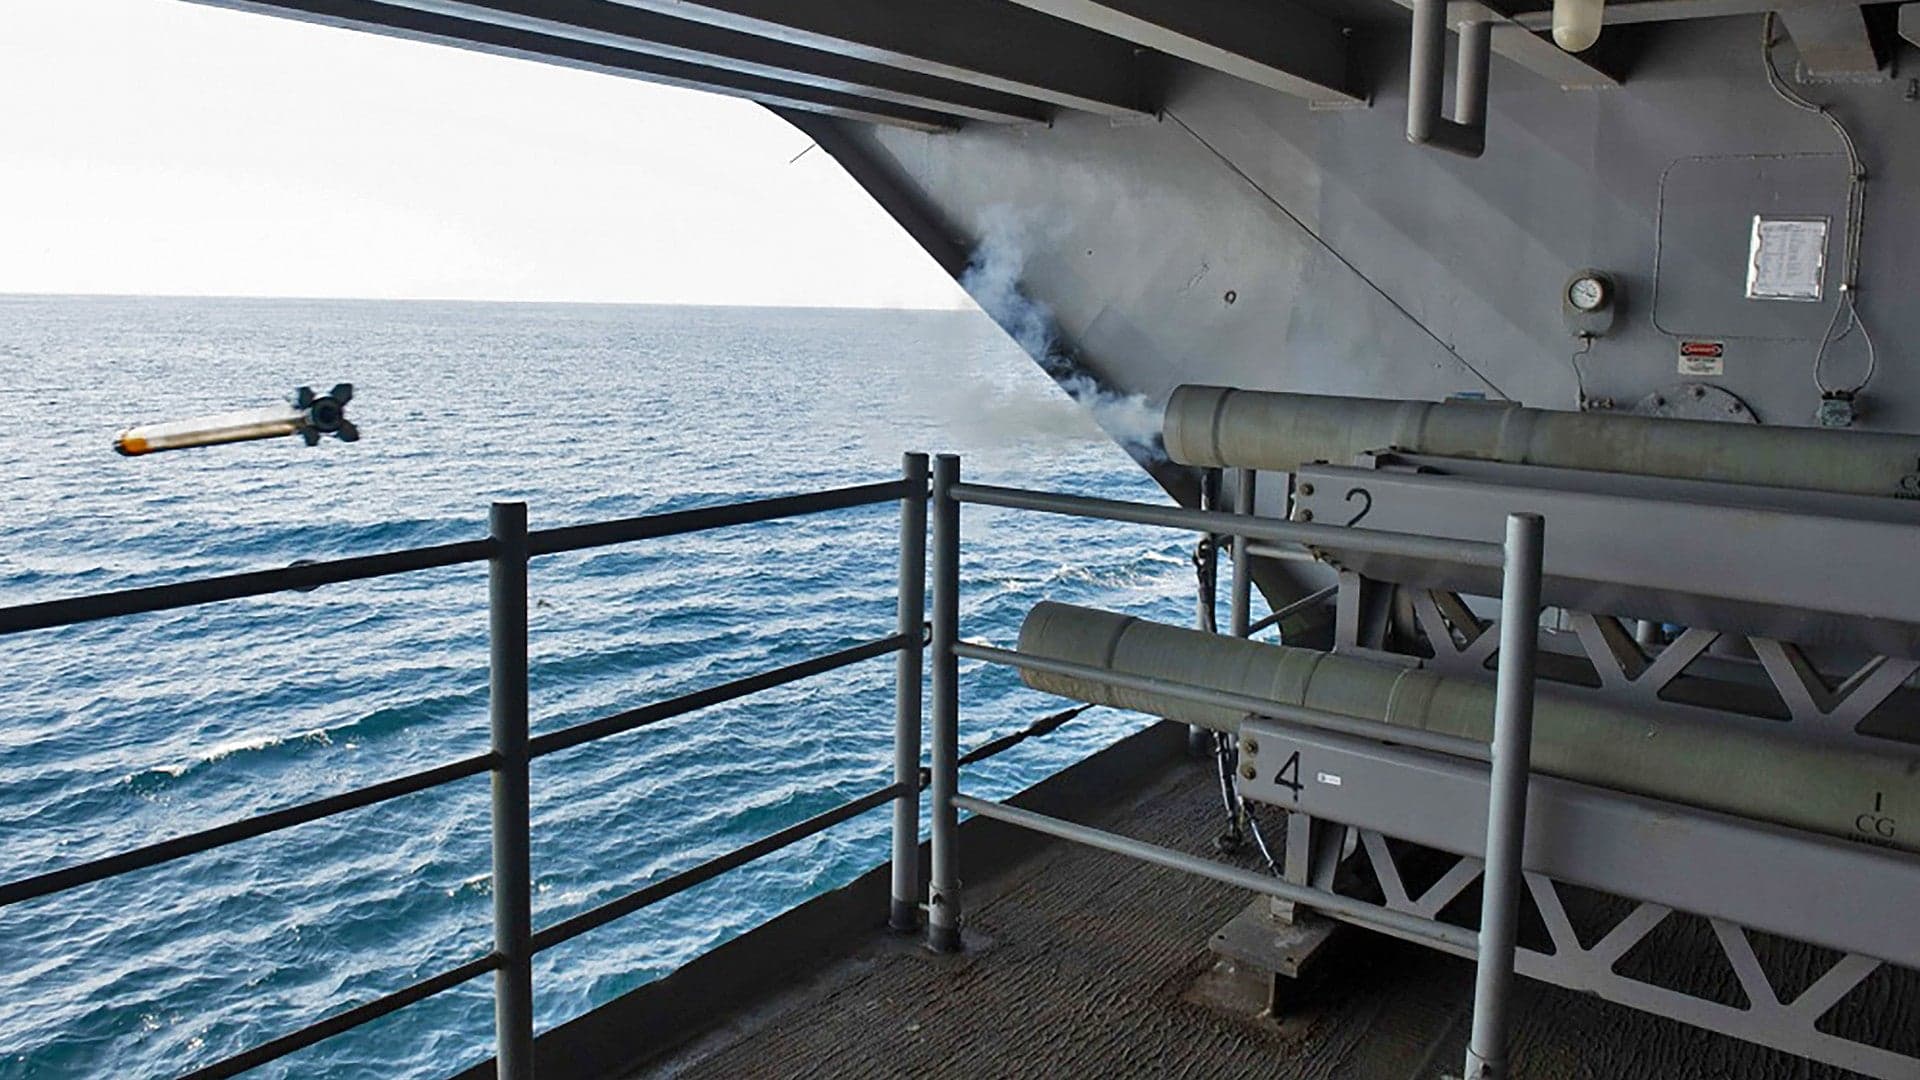 Sailors On U.S. Navy Carriers Are Still Training To Use Unreliable Anti-Torpedo Torpedoes